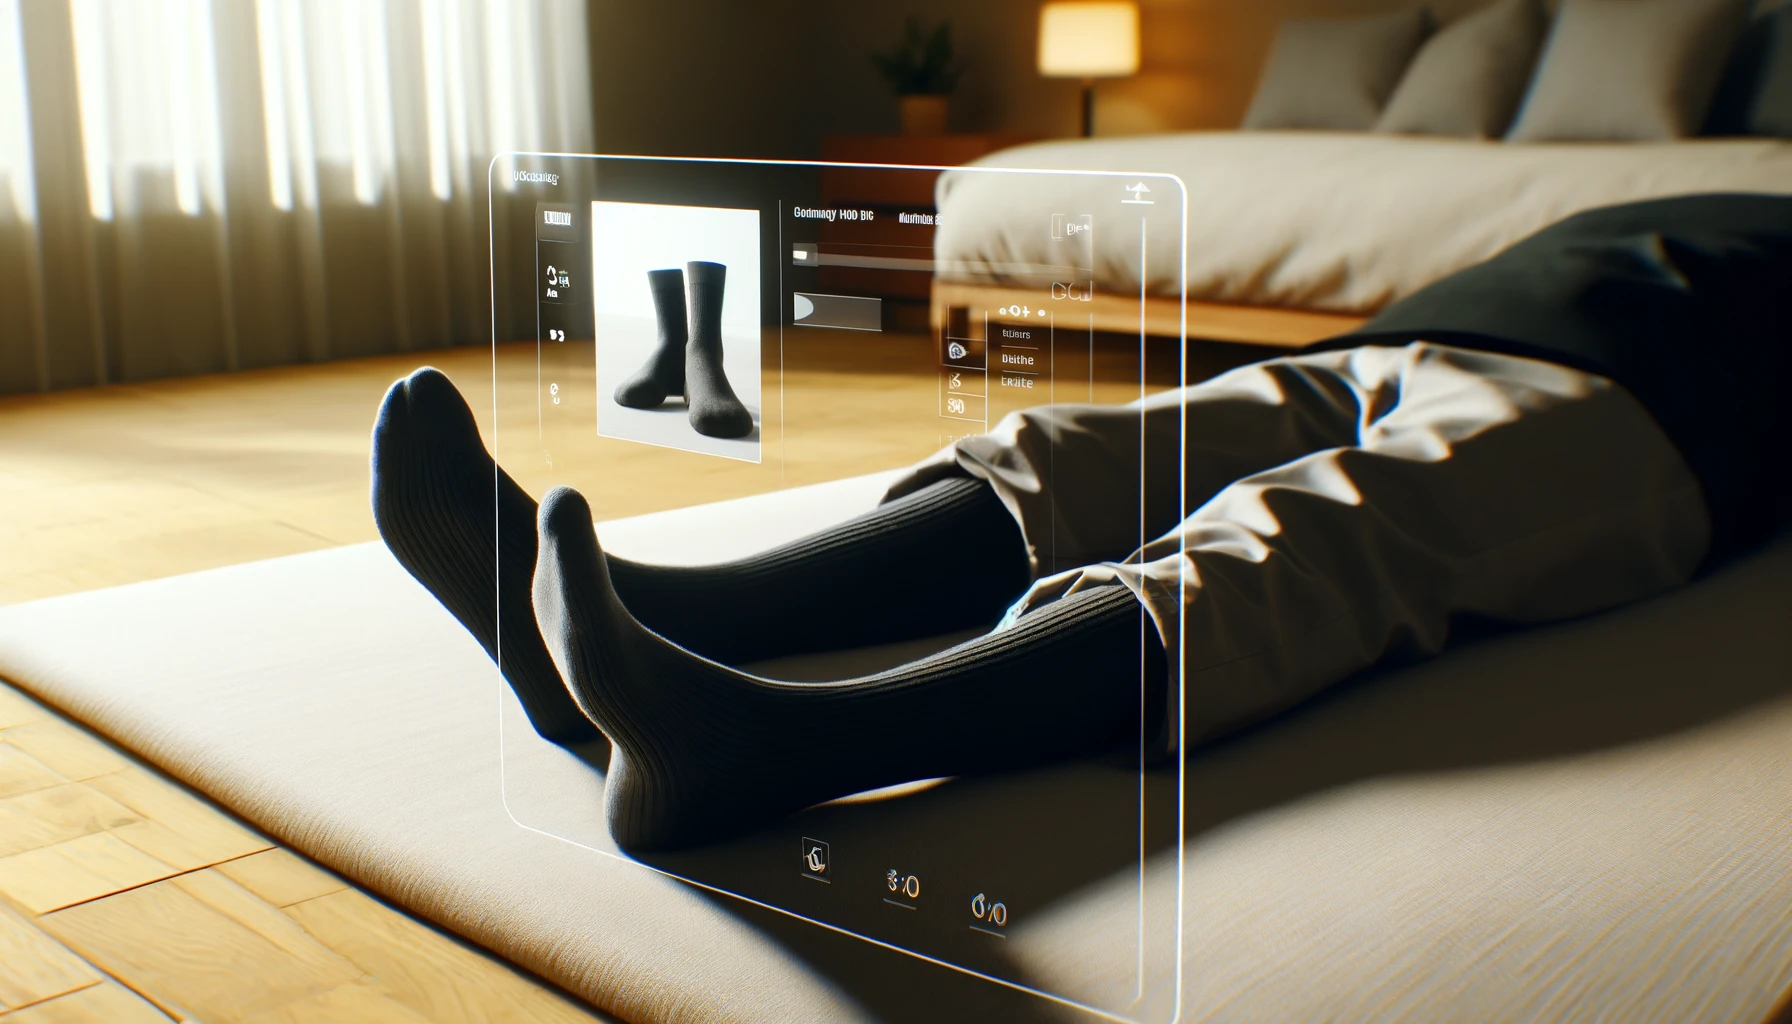 Visualize a person lying on their side wearing black socks that cover the legs from the knees down. The image should show the socks fitting snugly, with a clear view of the socks from the side. The setting should be a calm and neutral space, such as a bedroom or a lounge area, that suggests relaxation. The lighting should be soft and warm, giving a cozy and comfortable ambiance. This scene should be captured in a 16:9 aspect ratio to give a widescreen perspective.